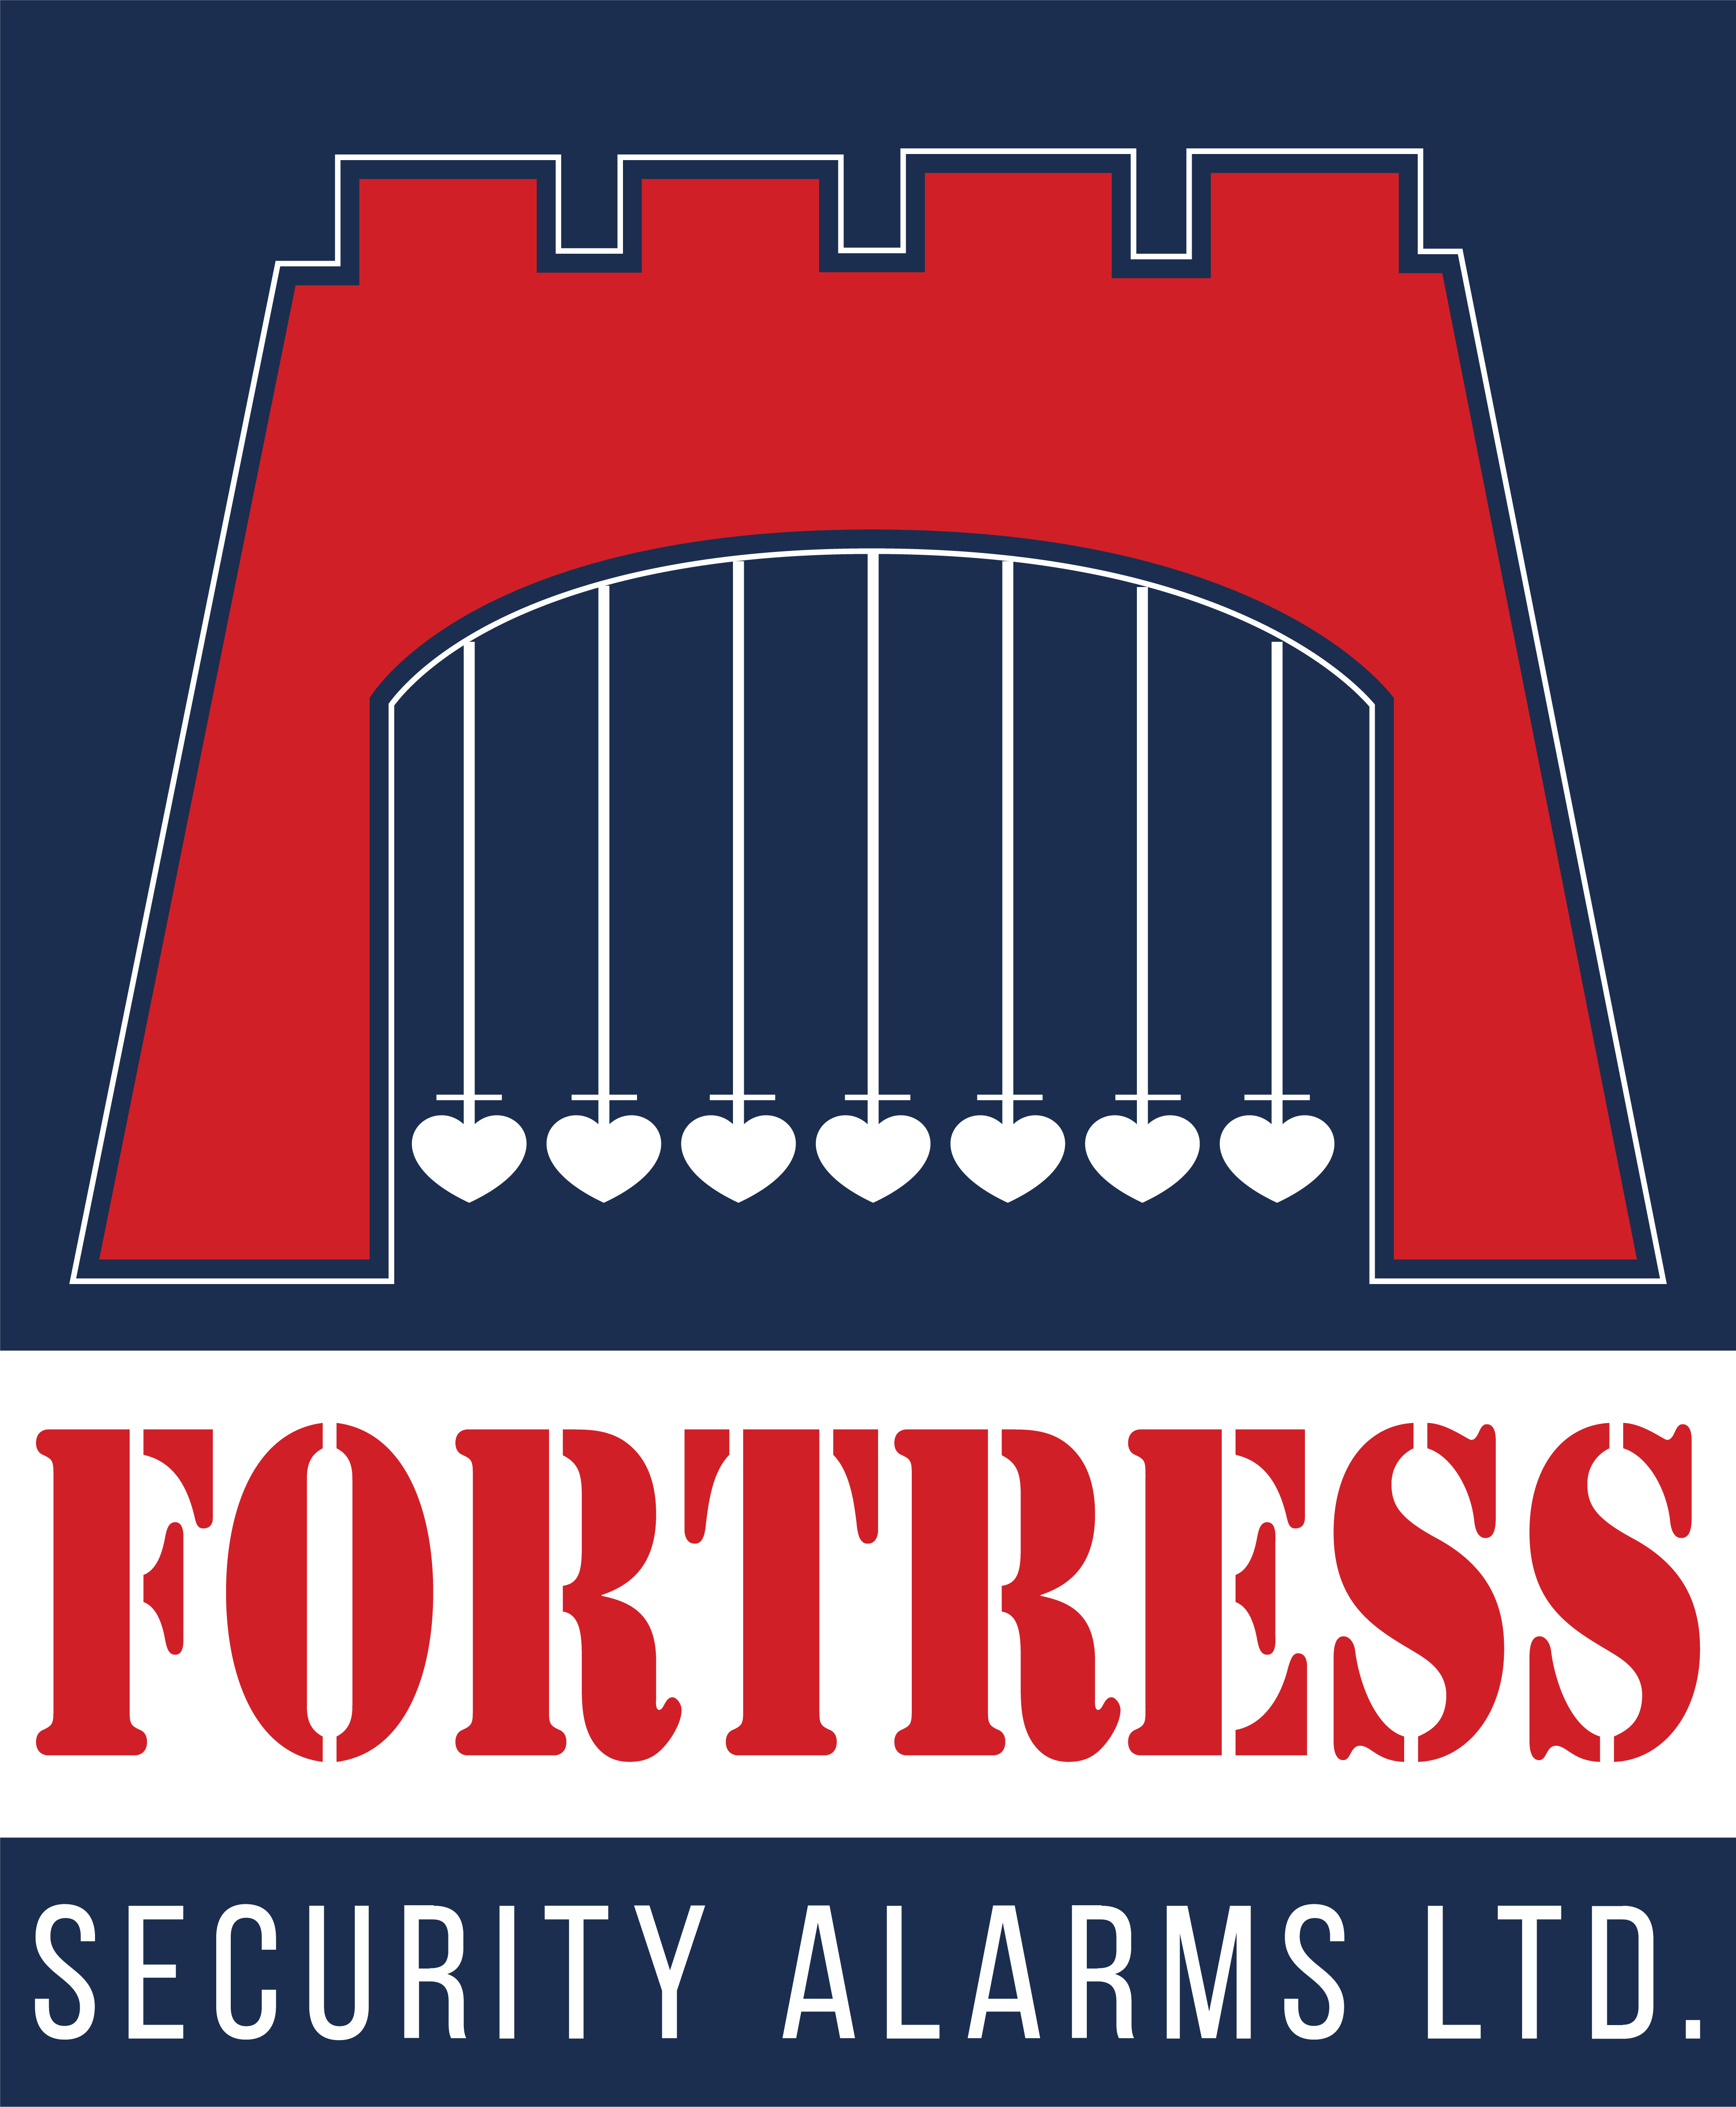 logo for Fortress Security Alarms Ltd